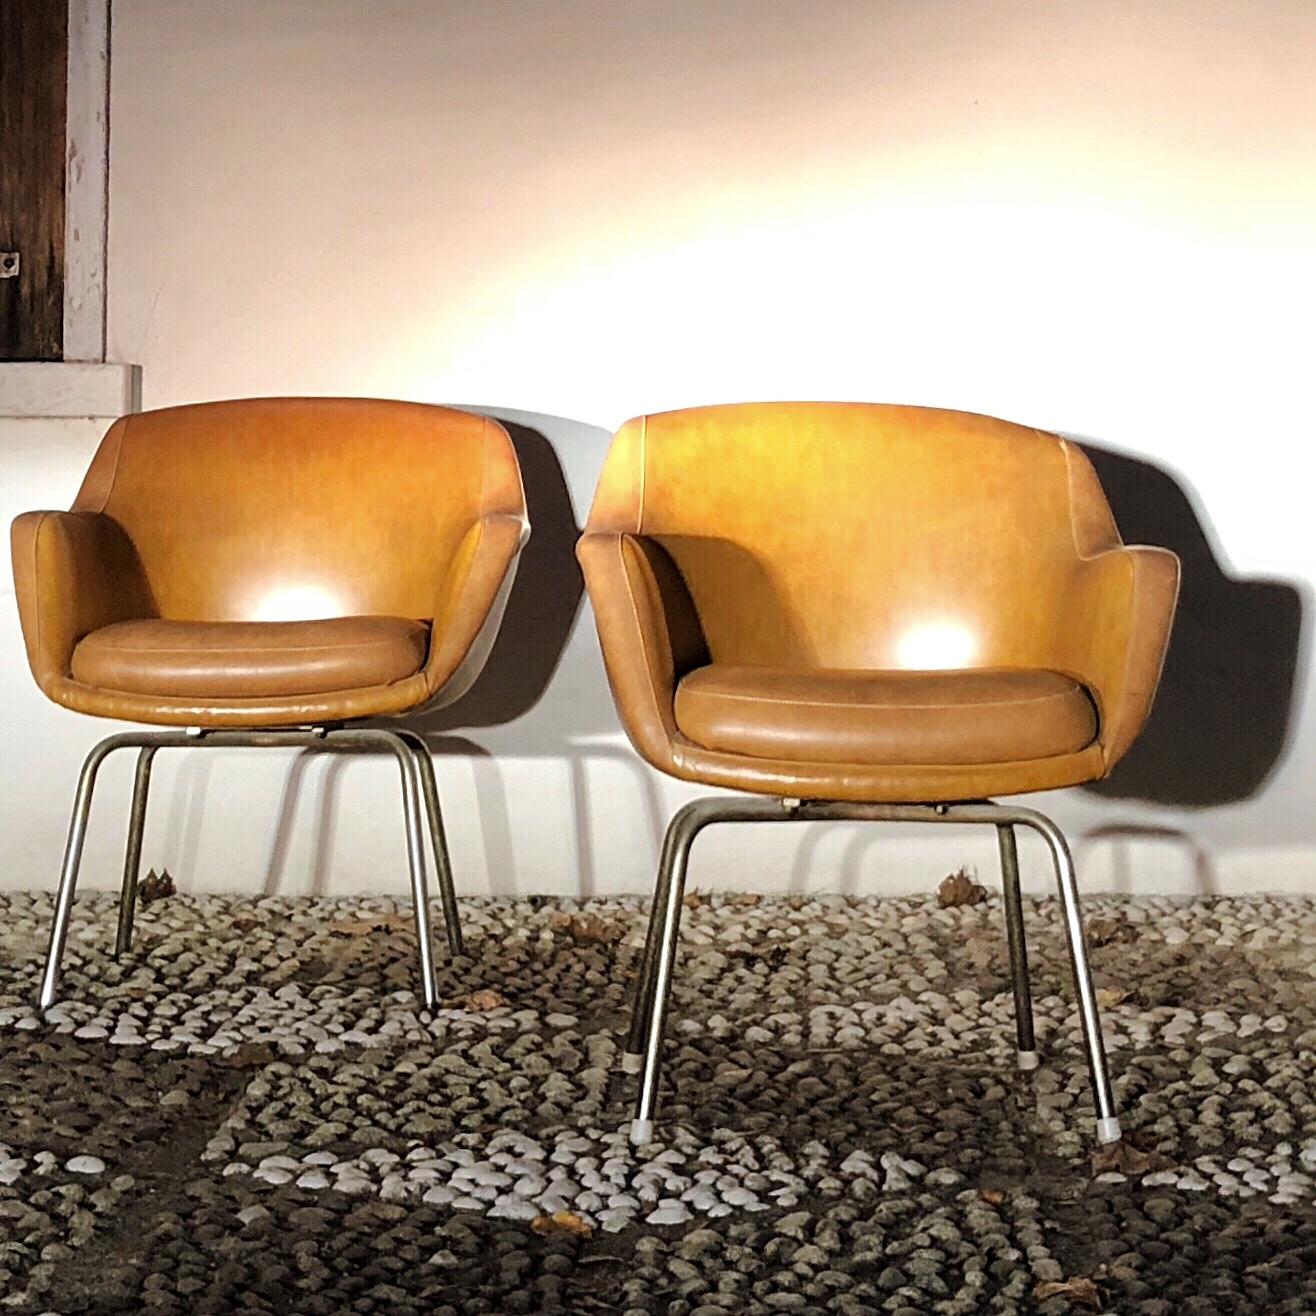 Pair of Midcentury Brown Leather Armchairs in the Style of Arne Jacobsen, 1960s For Sale 3